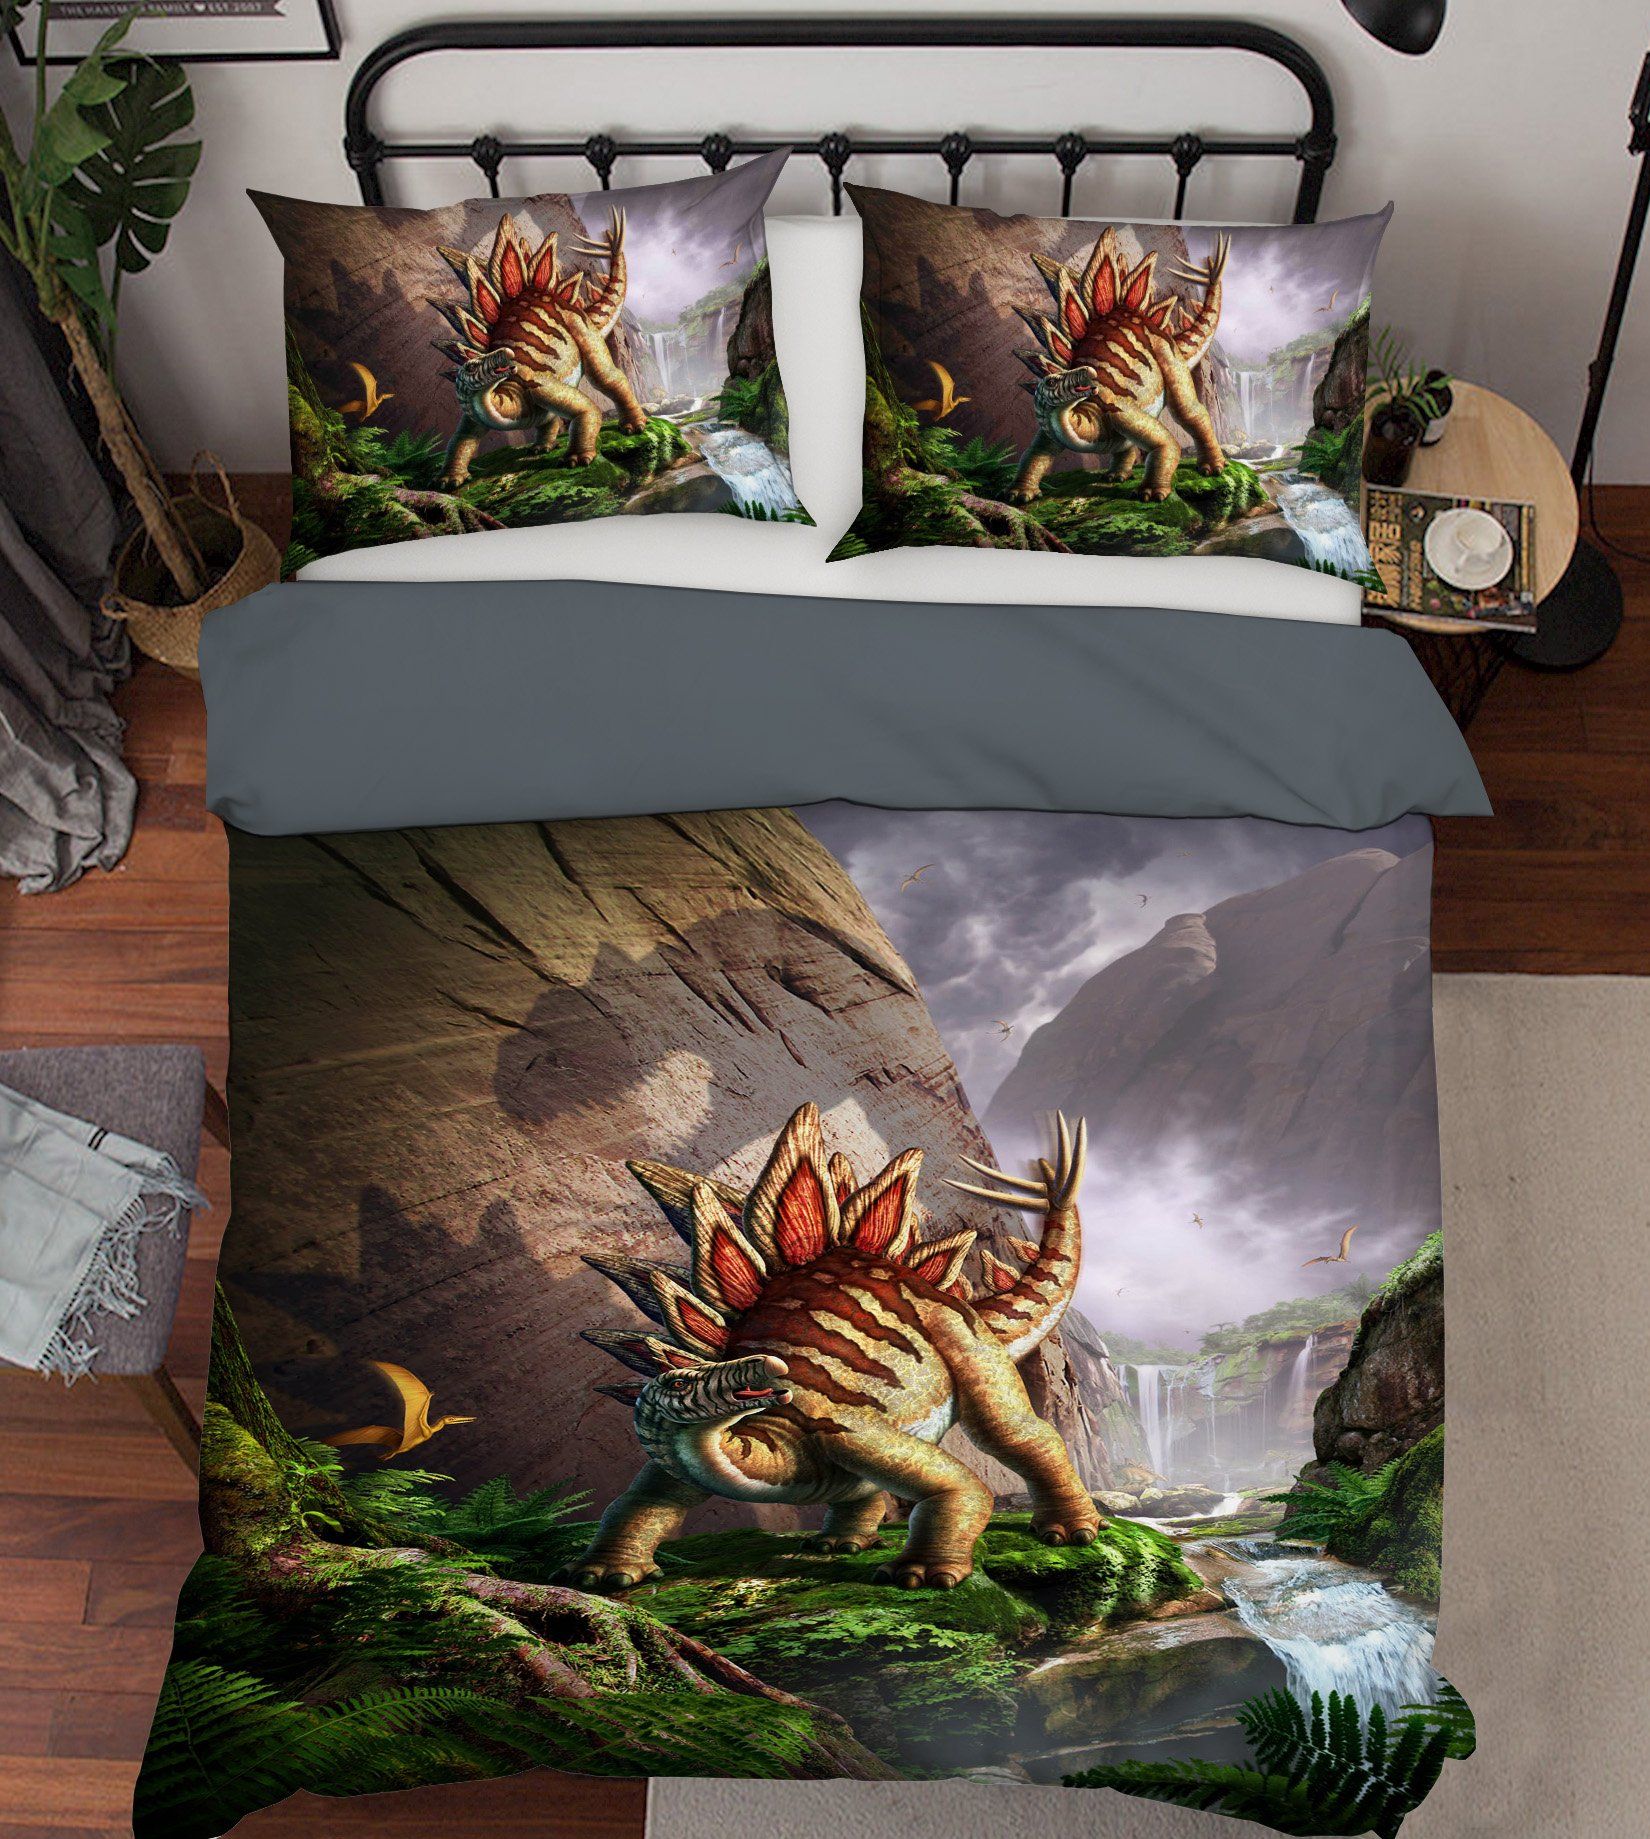 3D Against The Wall 2110 Jerry LoFaro bedding Bed Pillowcases Quilt Quiet Covers AJ Creativity Home 